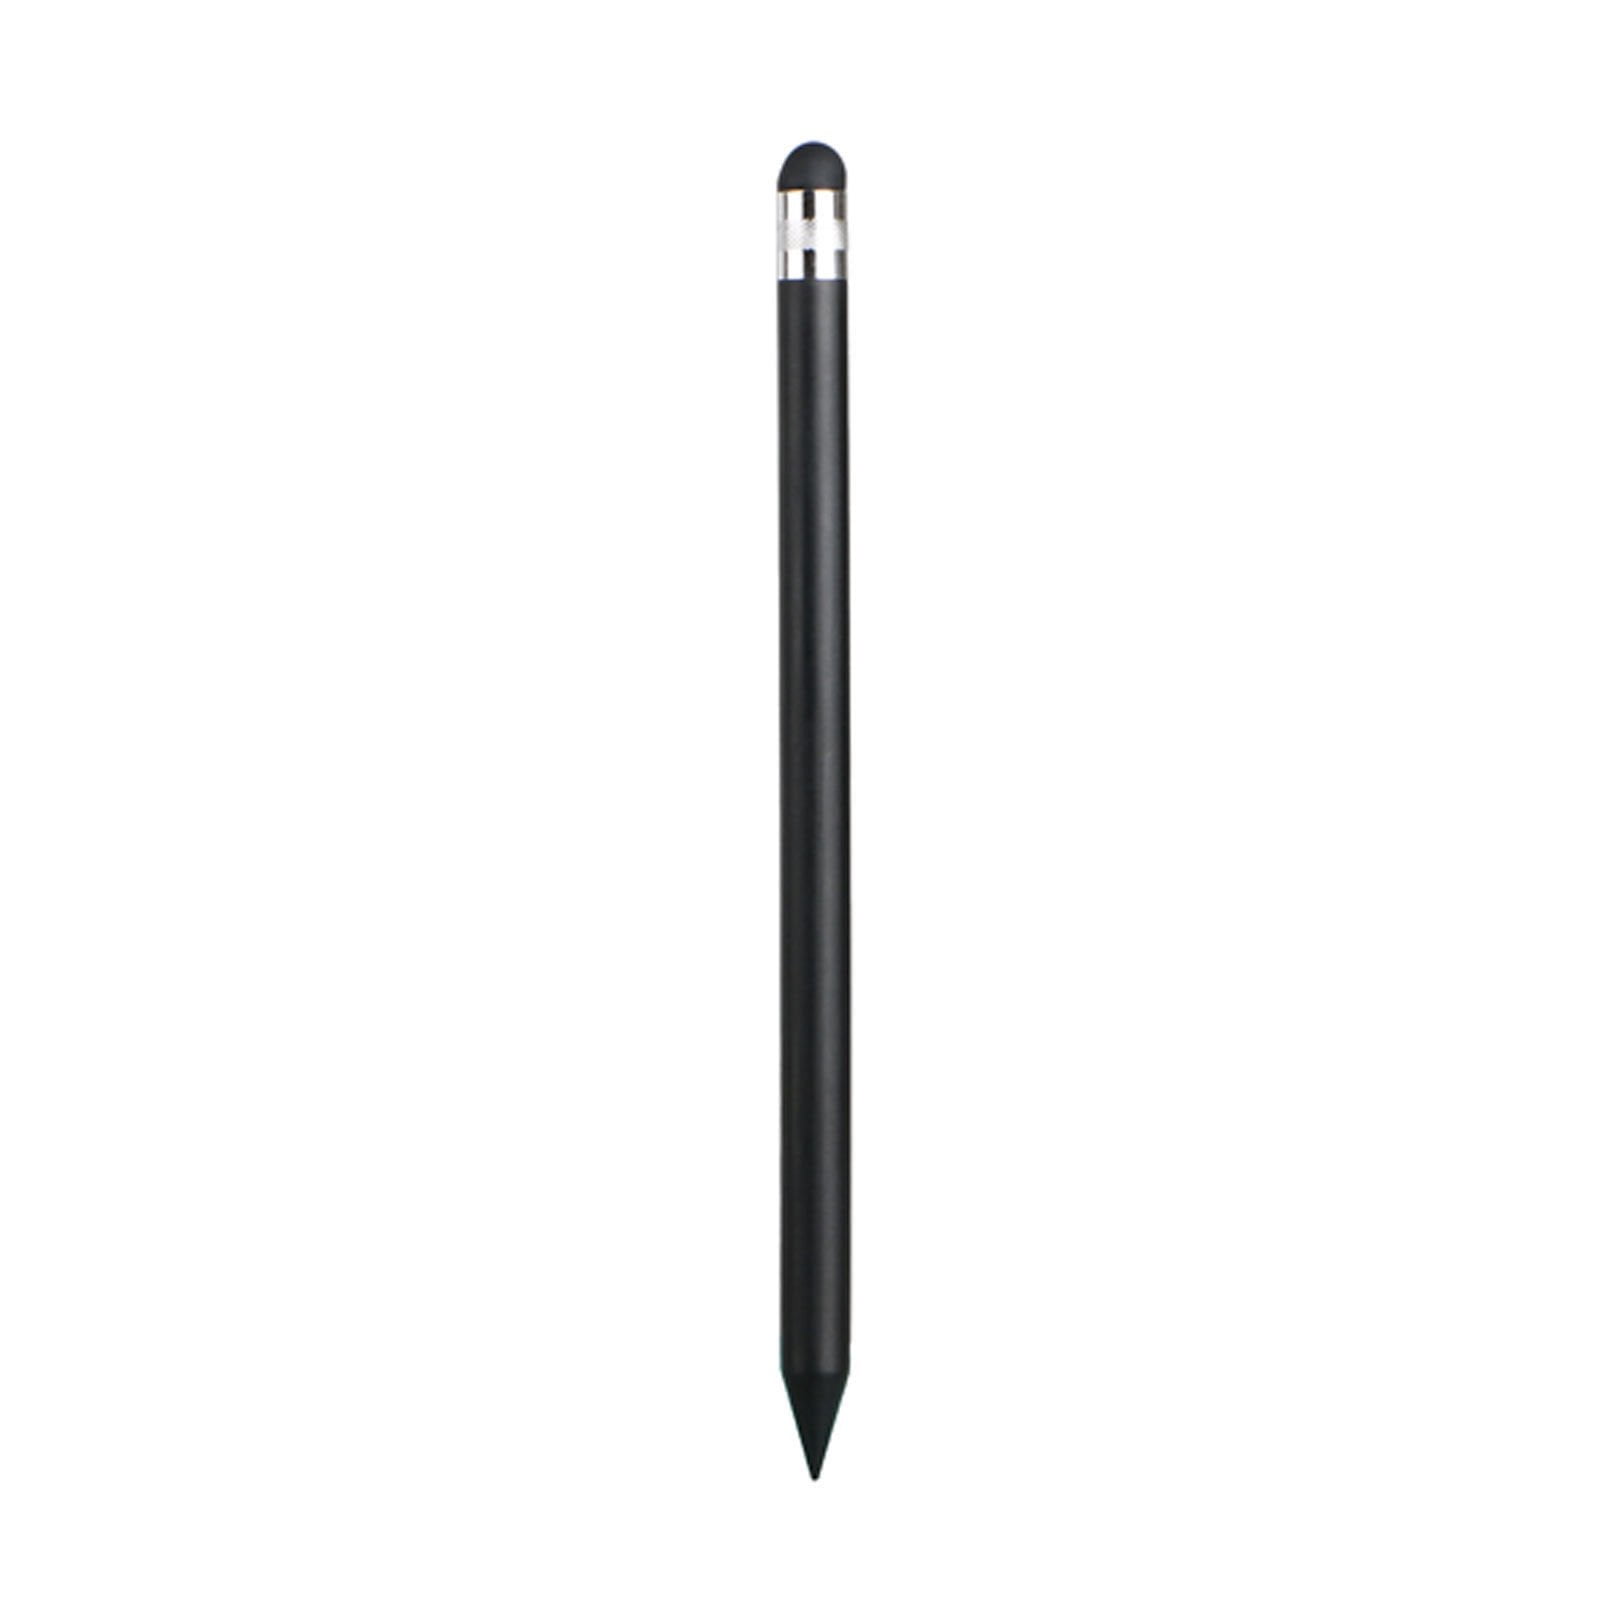 2pc Capacitive Stylus Touch Screen Pen for iPhoneX Galaxy S Remarkable PrecisBE 